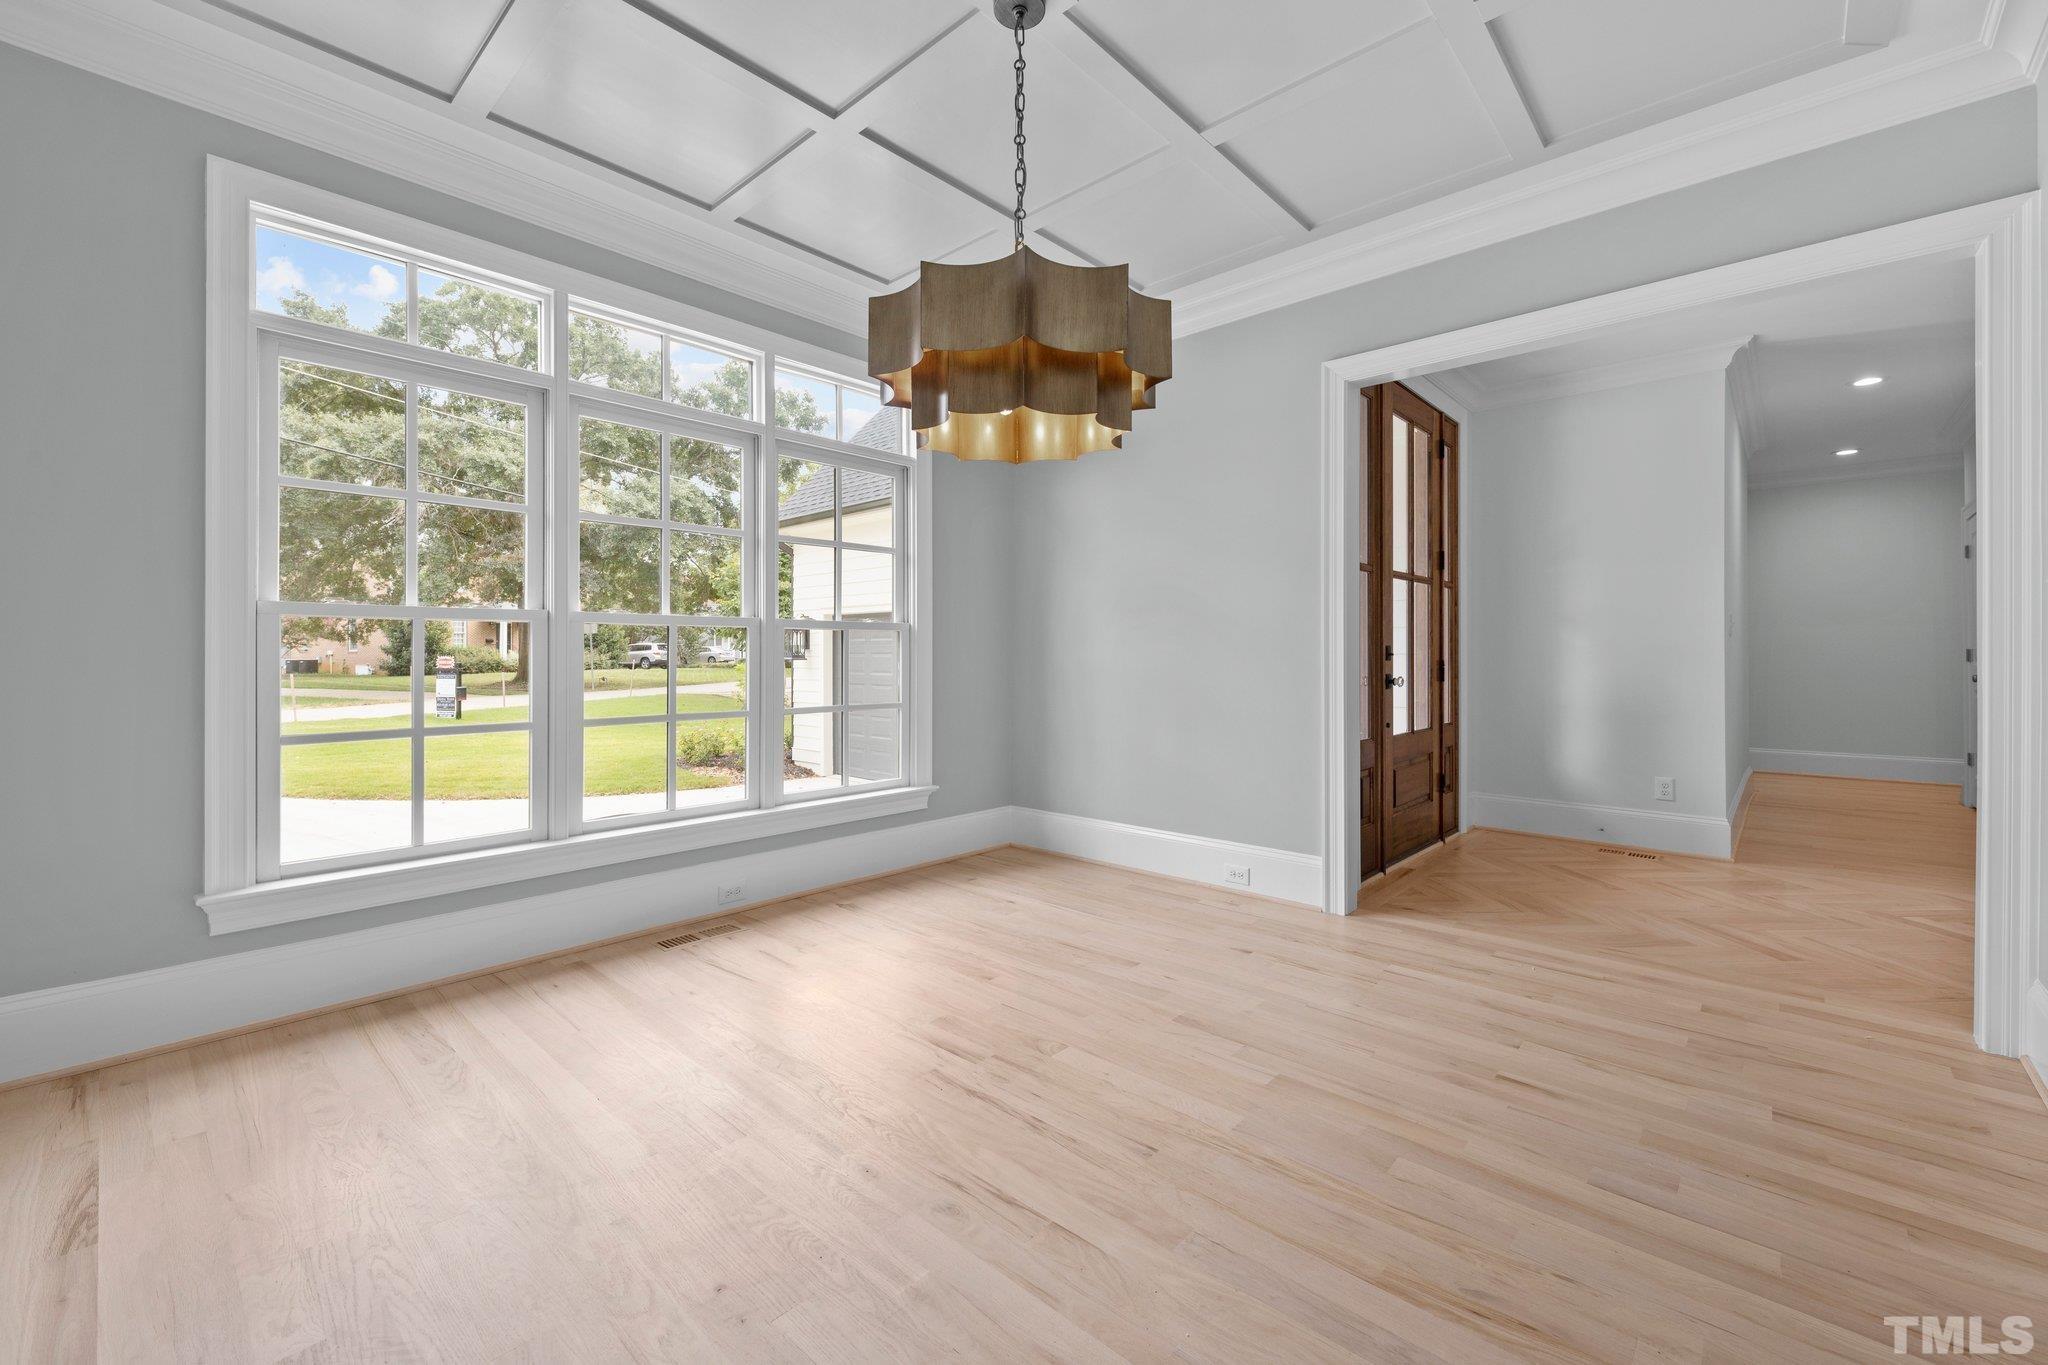 Spacious dining room with 9ft coffered ceiling and a one-of-a kind light fixture.